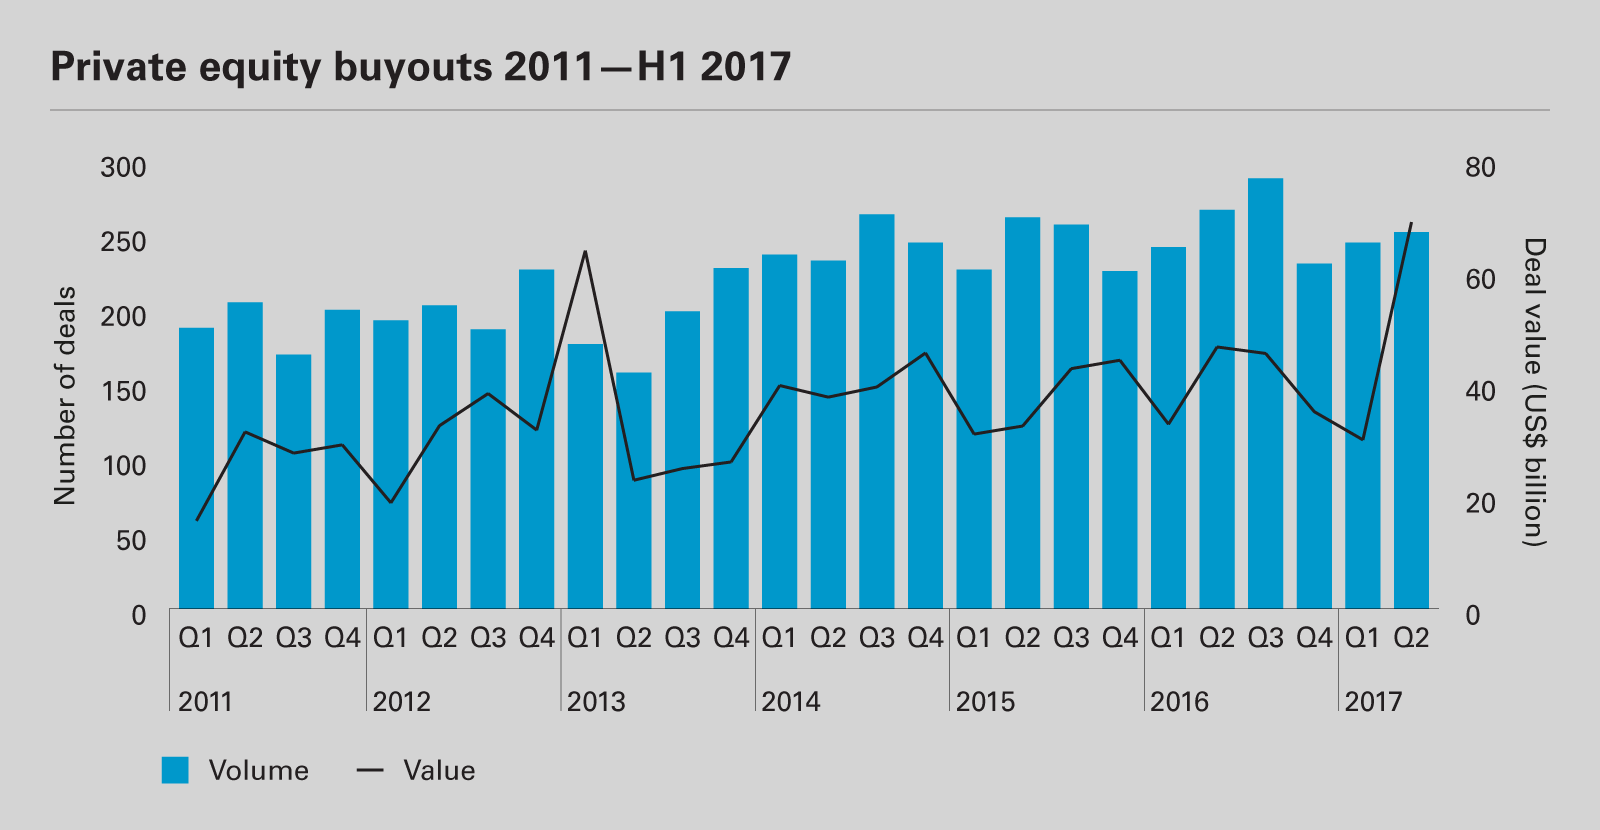 Private equity buyouts 2011 - H1 2017